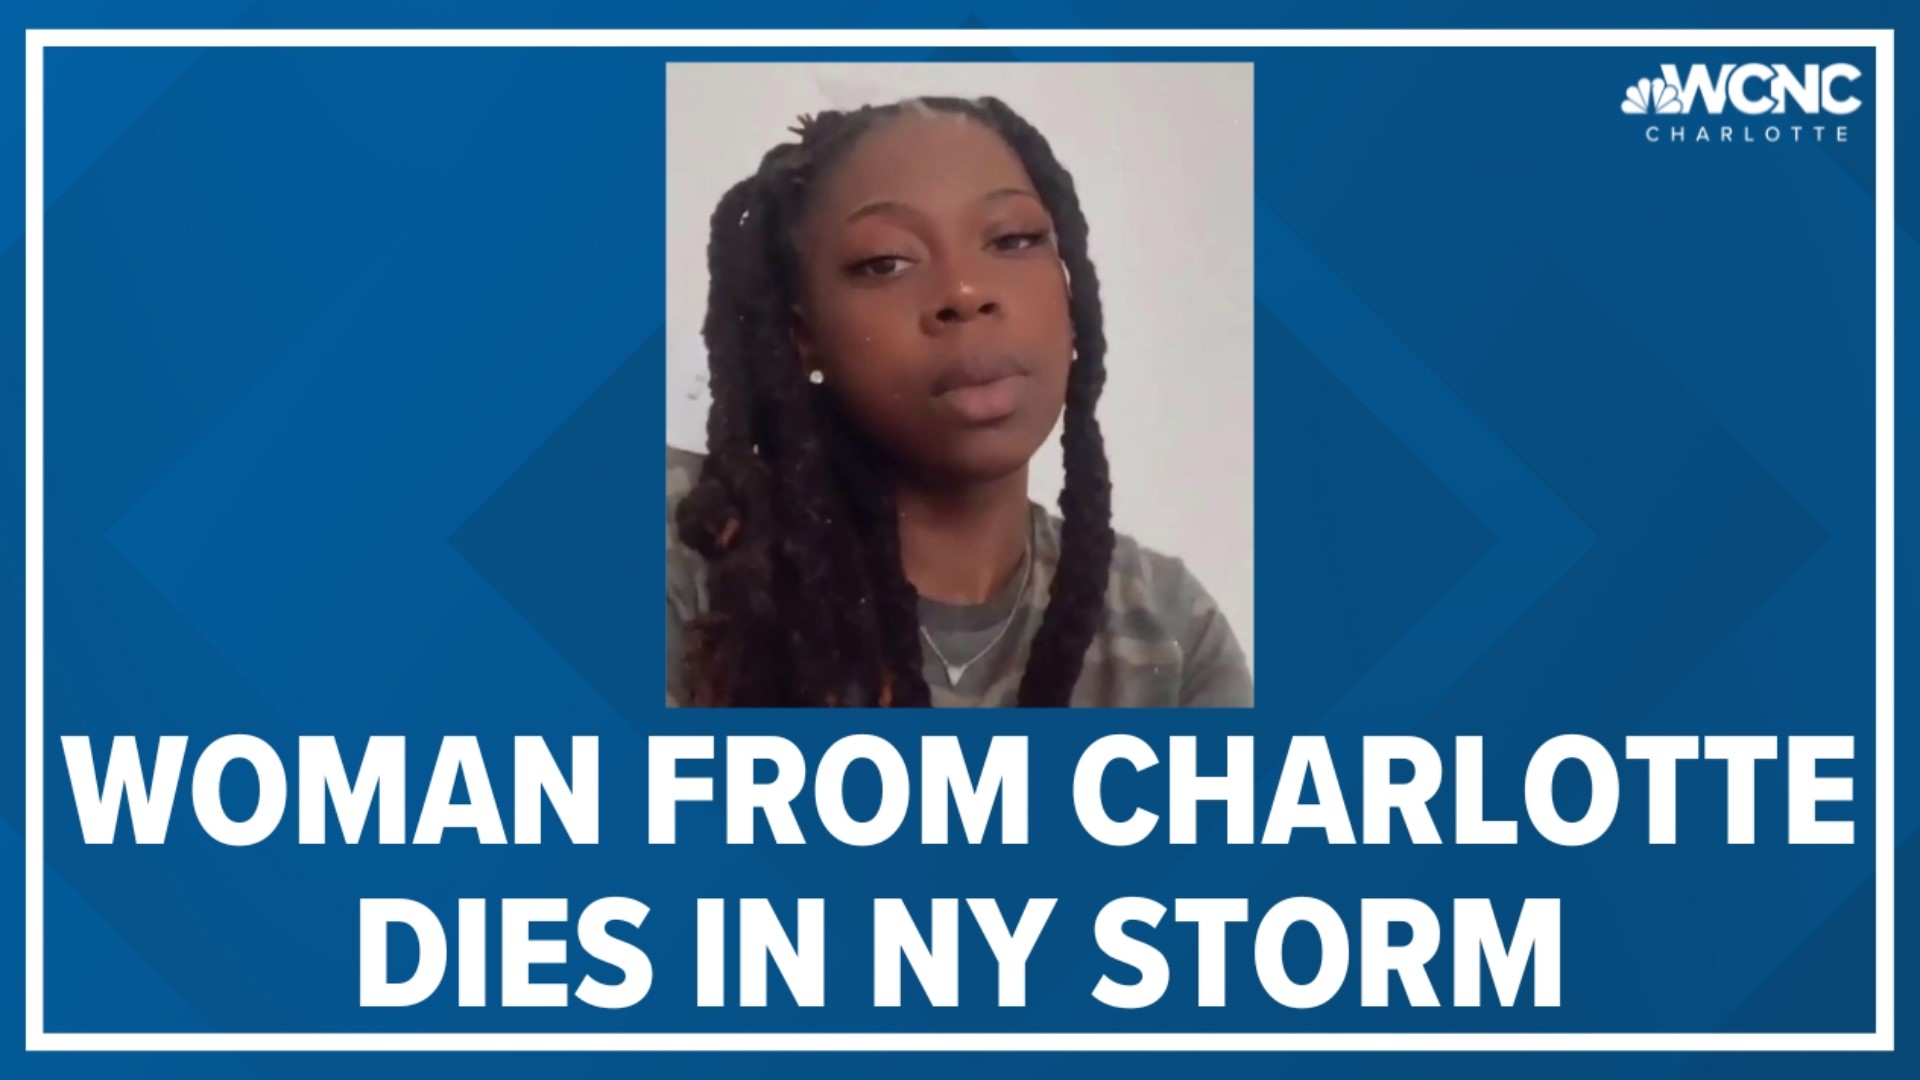 Twenty-eight people died from the weekend blizzard in western New York, including a young woman who grew up in Charlotte.